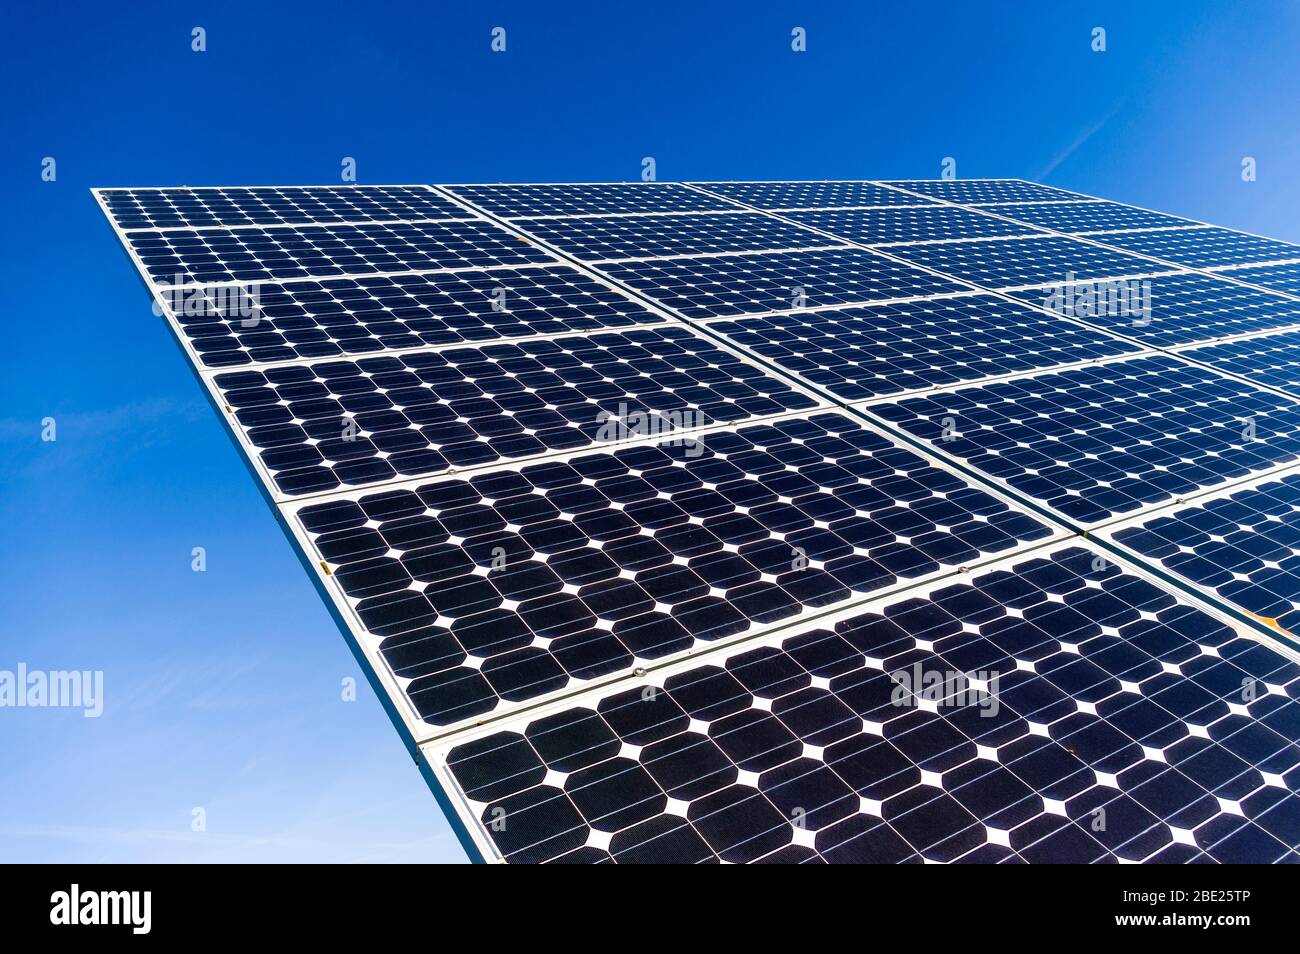 Close-up, detail view of solar panels of a solar power plant in cloudless and bright blue sky Stock Photo